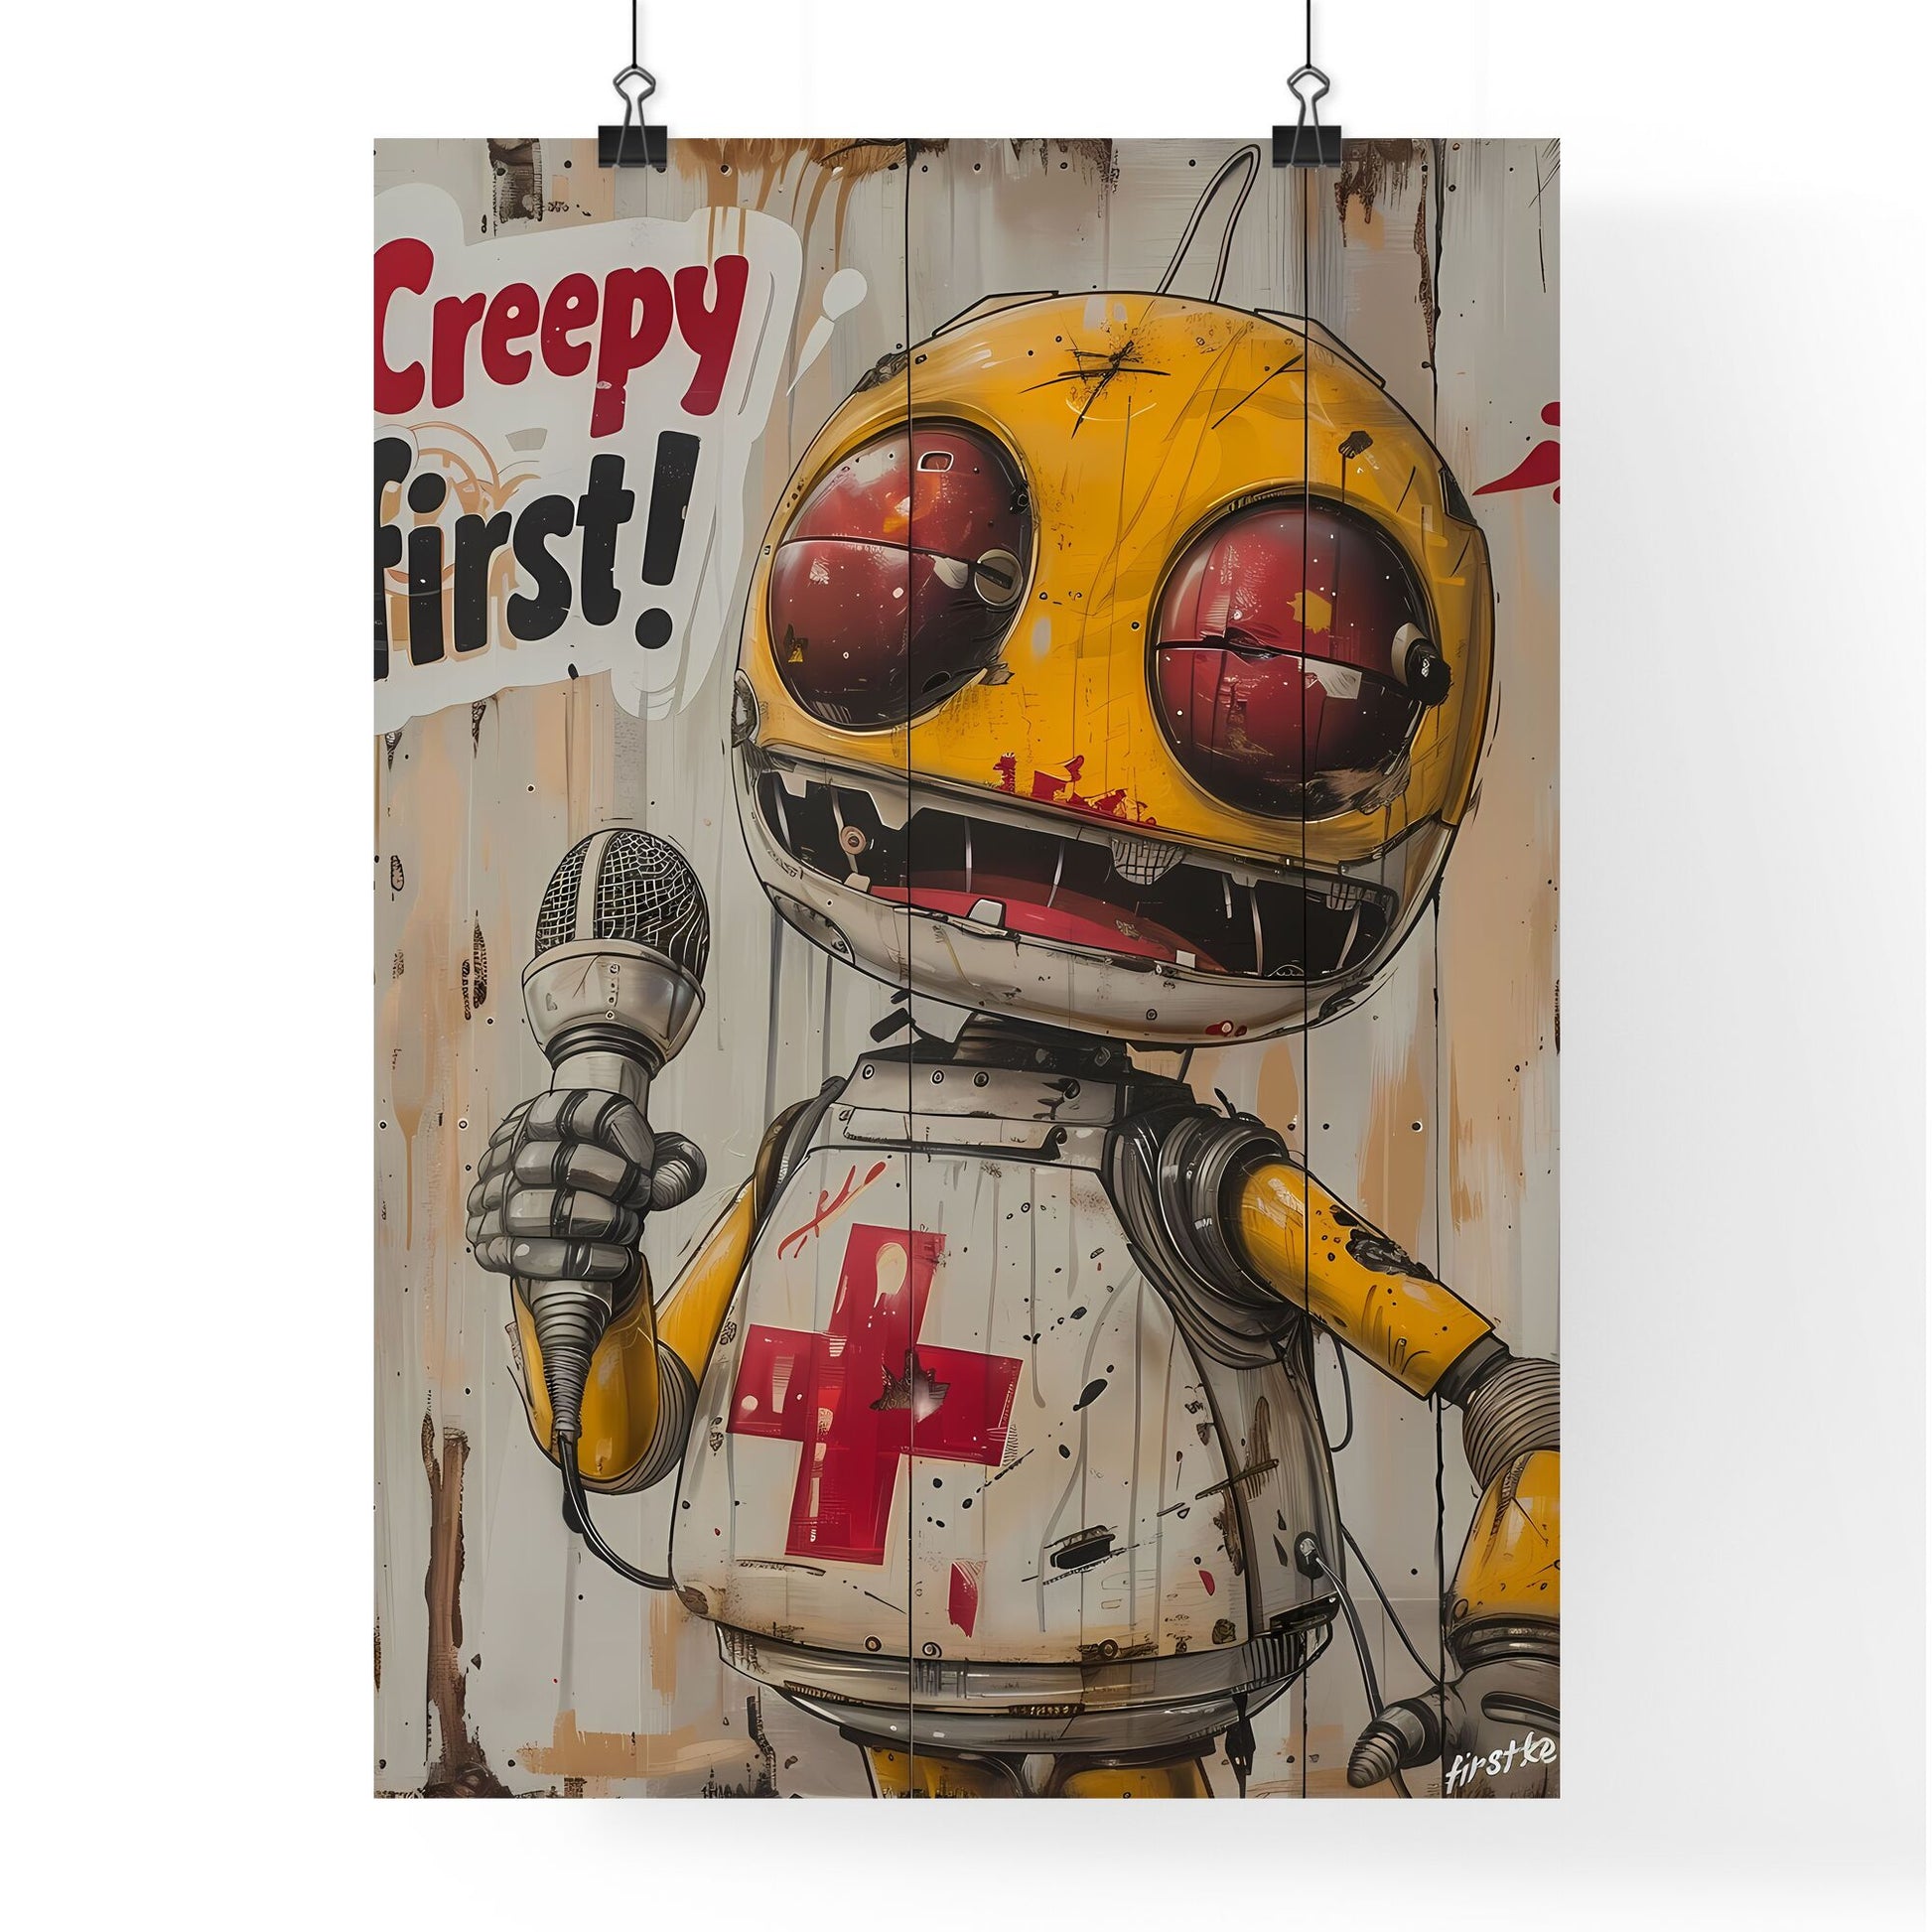 Kawaii-inspired Vintage Japanese Mic Mascot: Vibrant Creepy First! Poster with Artistic Focus, Red Cross - Unique Stock Image Default Title